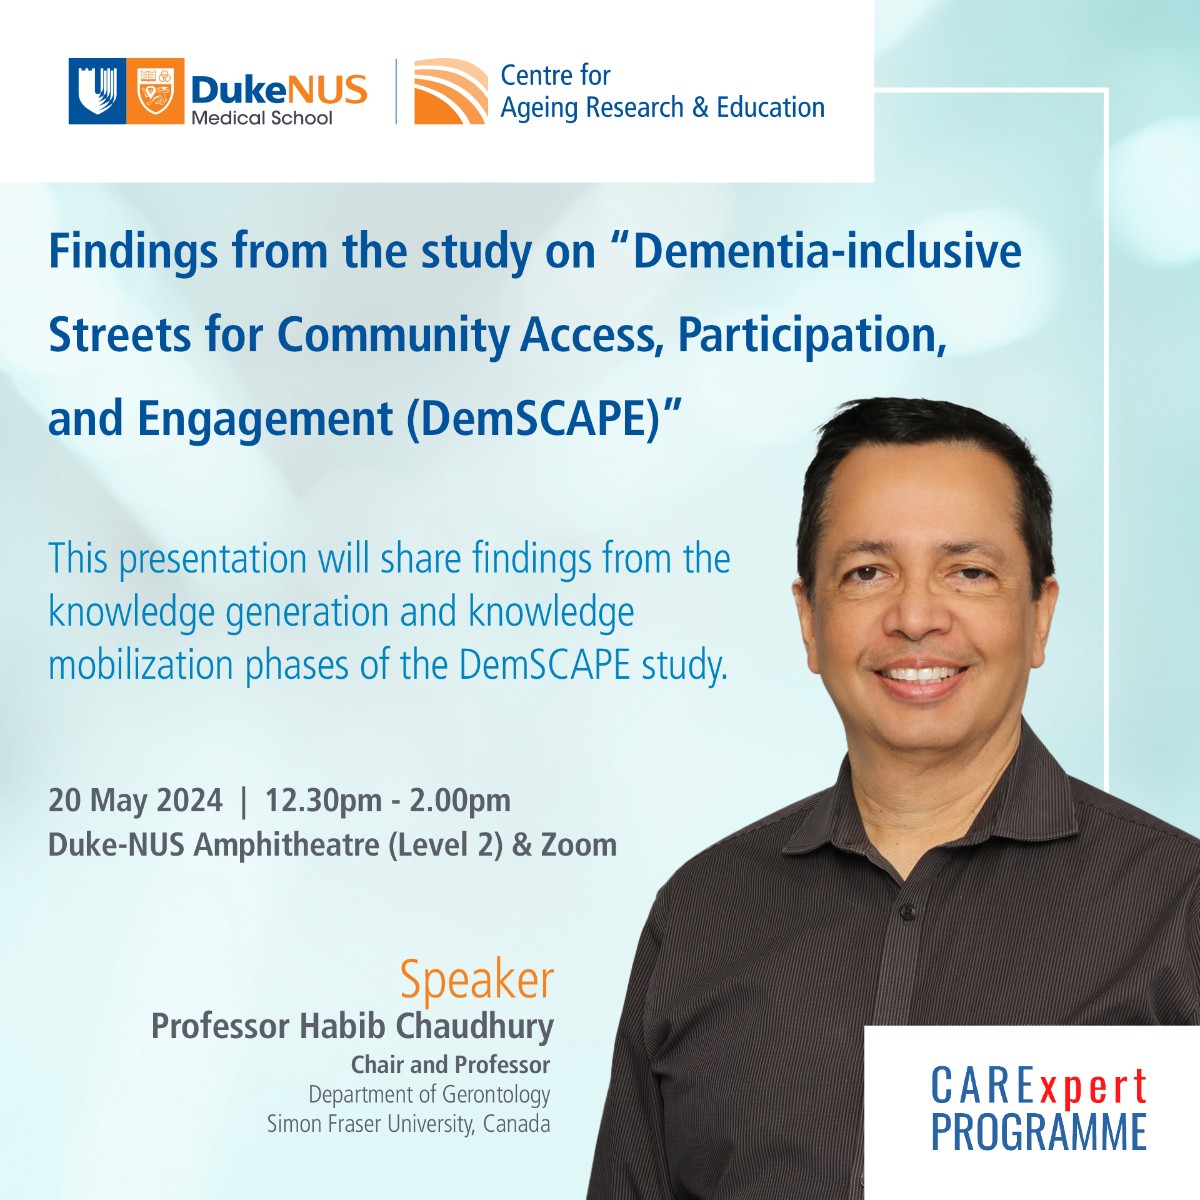 Join us for the next CARExpert Programme featuring Professor Habib Chaudhury from @SFU discussing findings from the DemSCAPE study on dementia-inclusive streets. Register here: nus-sg.zoom.us/webinar/regist… #DukeNUSResearch #DukeNUS #Ageing #Dementia